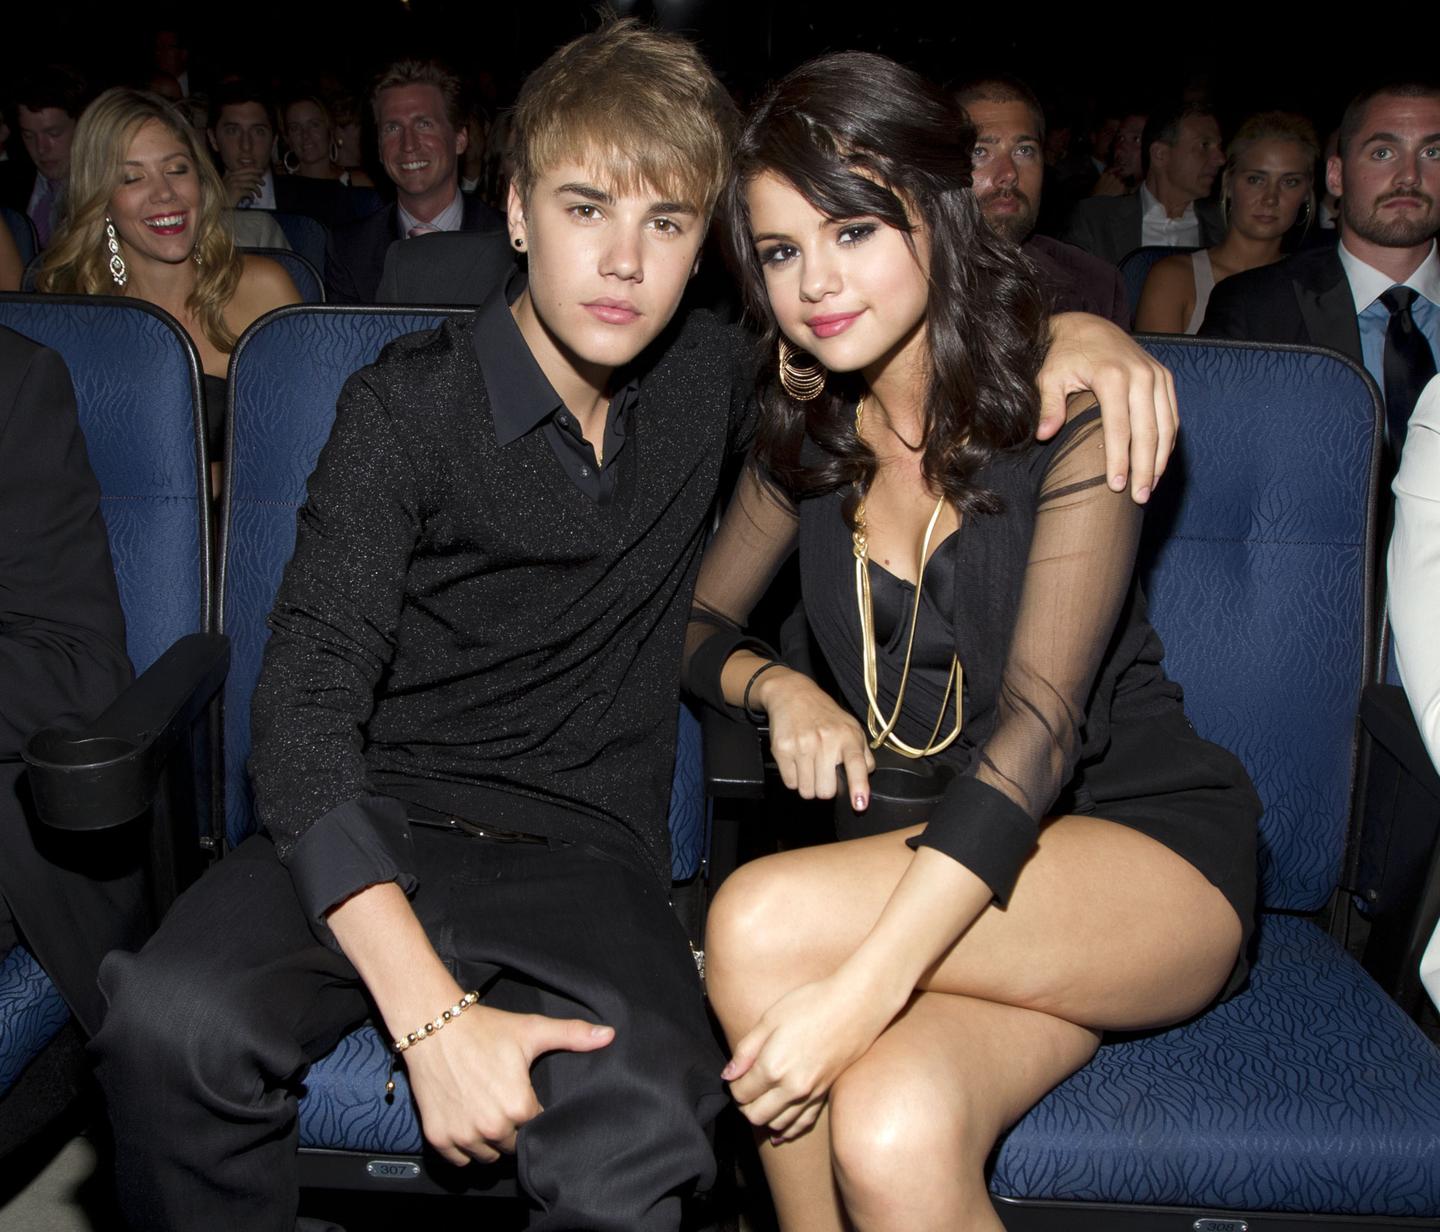 Justin Bieber Cheated on Selena Gomez, According to Her Instagram